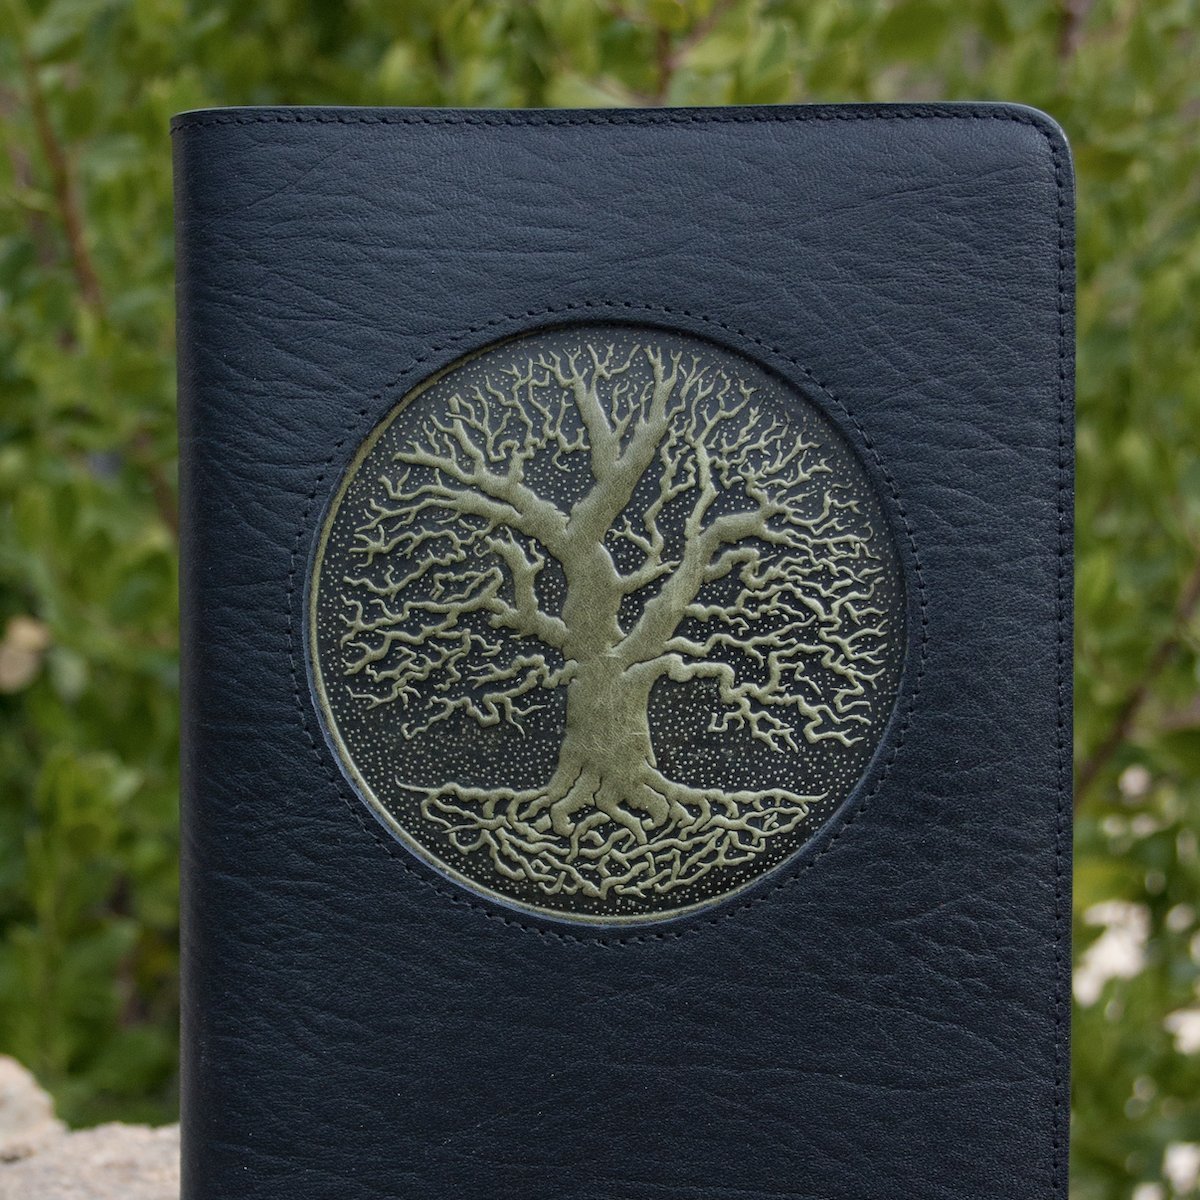 Leather XL Journal and Sketchbook Covers - Oberon Design